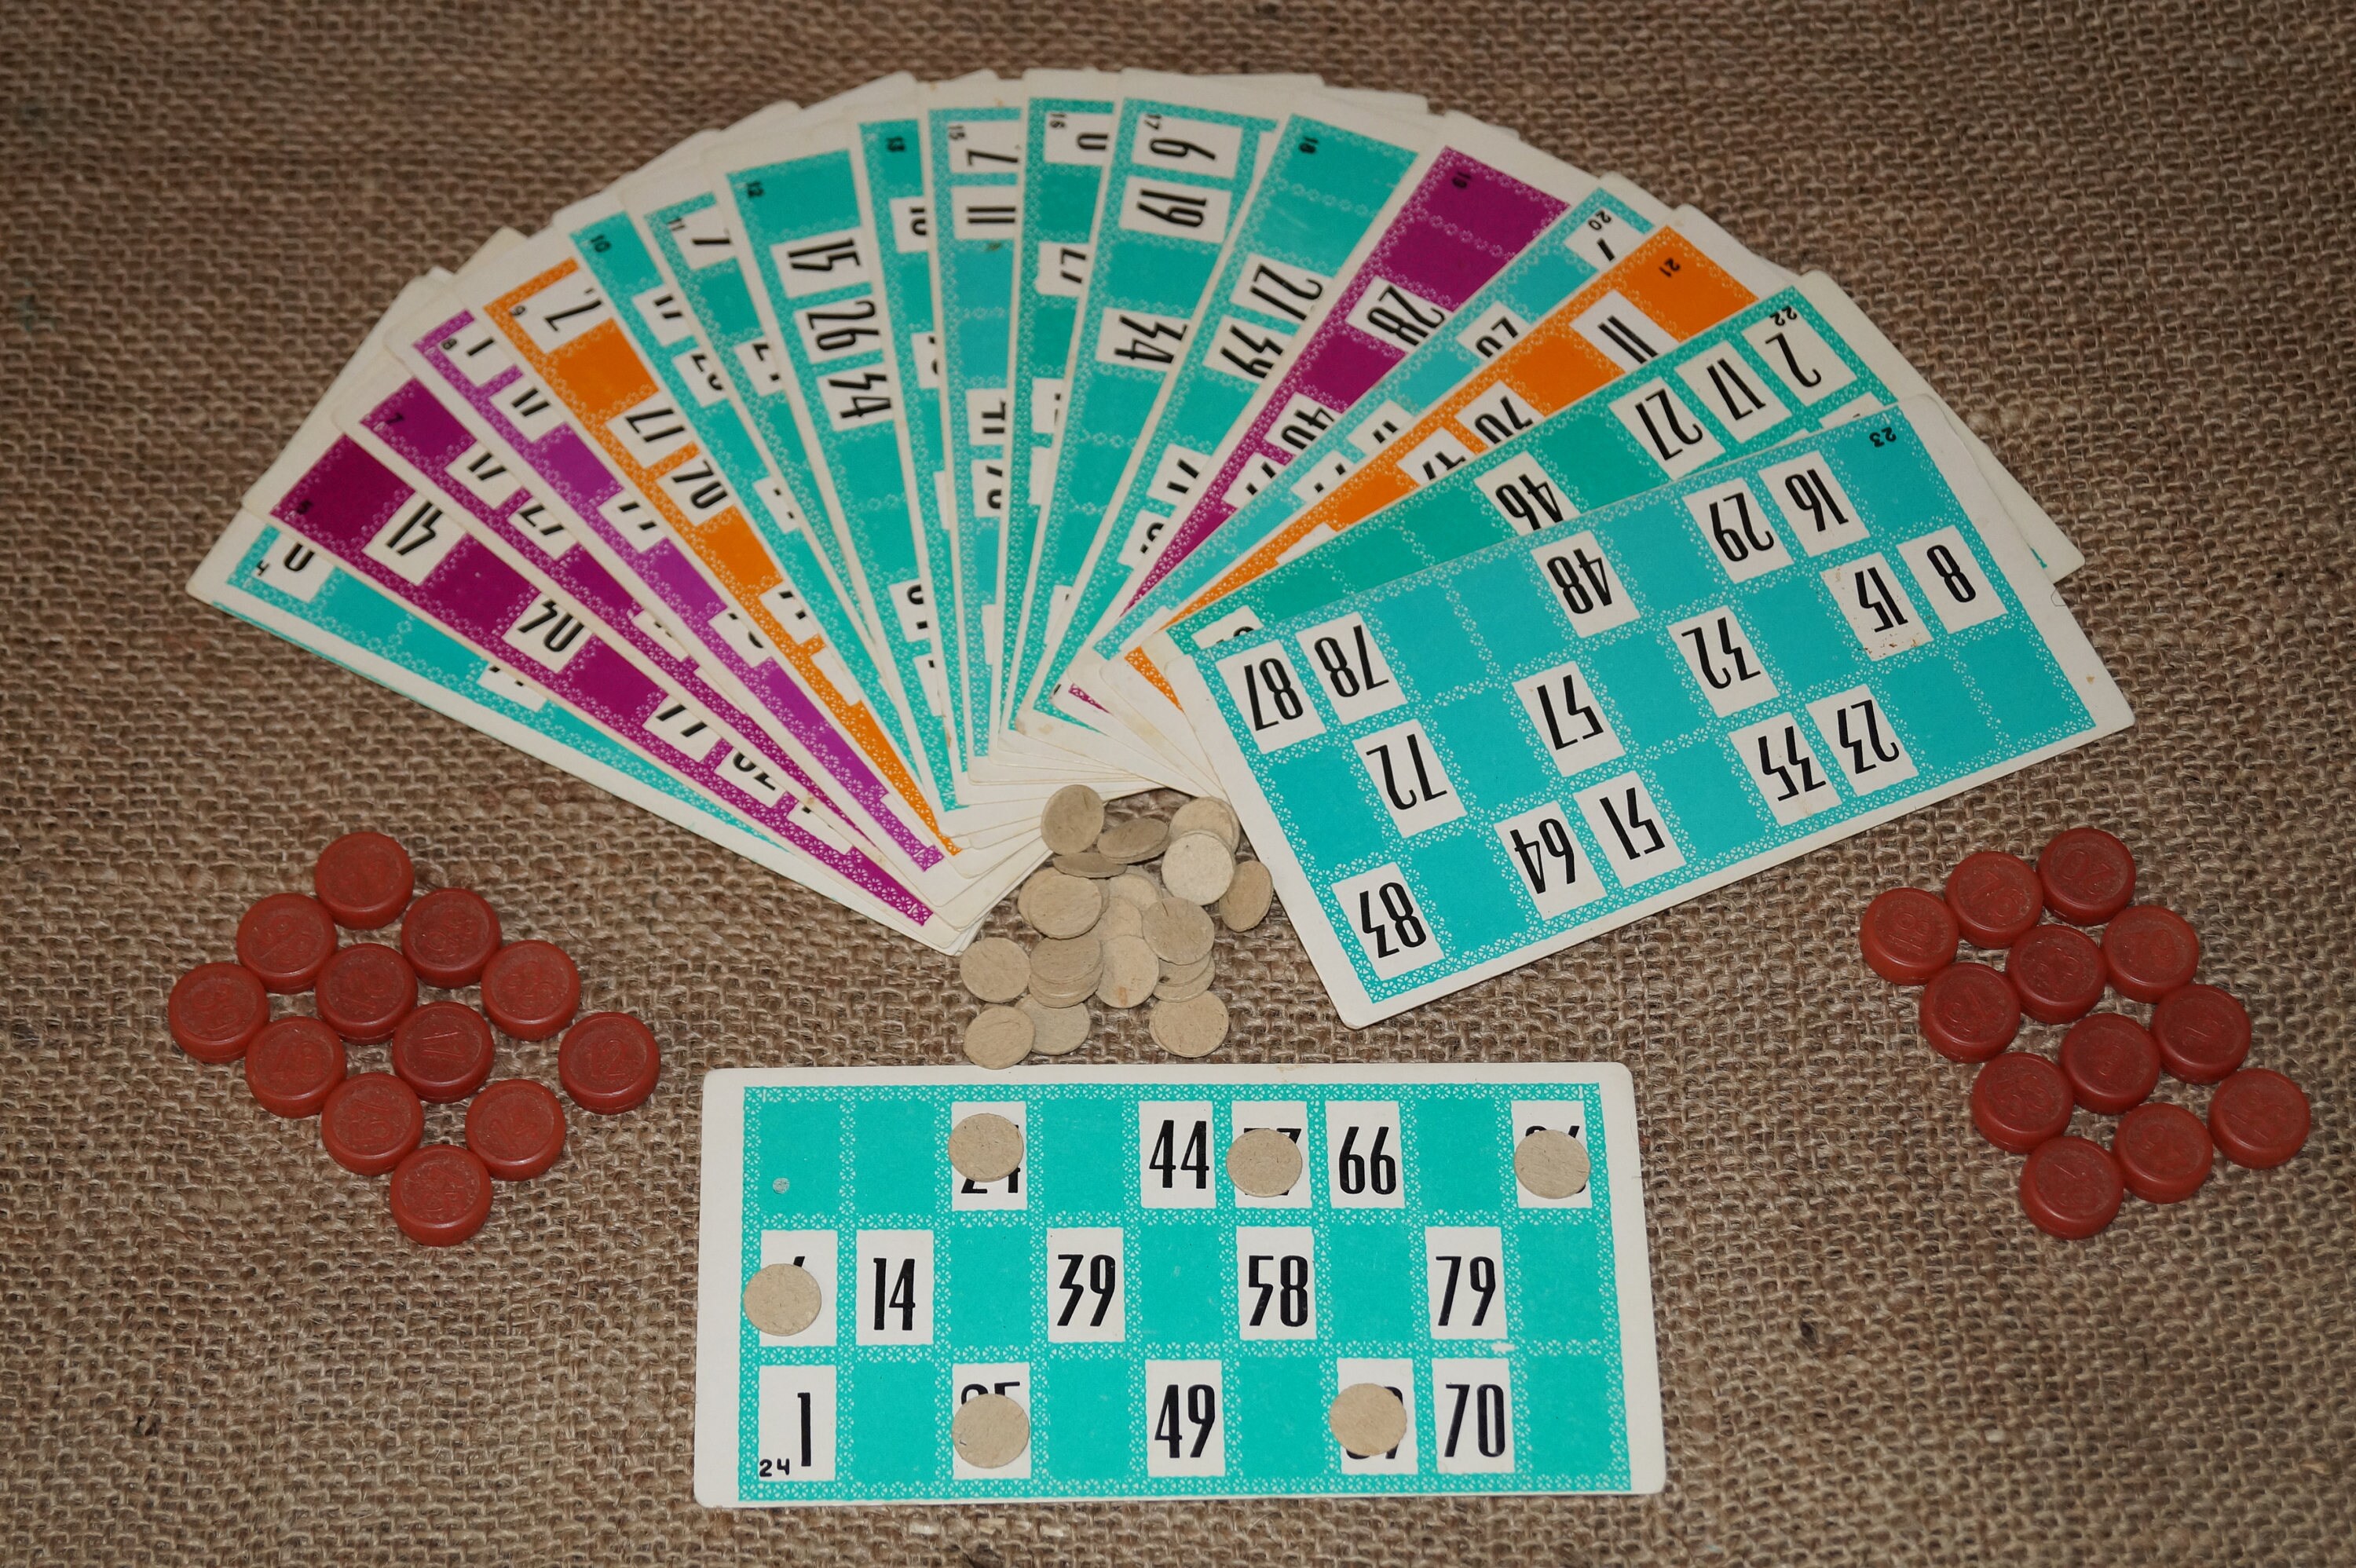  Extguds Tombola Bingo Game,Vintage Tombola Italian Game,Russian  Lotto with number1-90 for Lottery, for up to 24 Players : Toys & Games